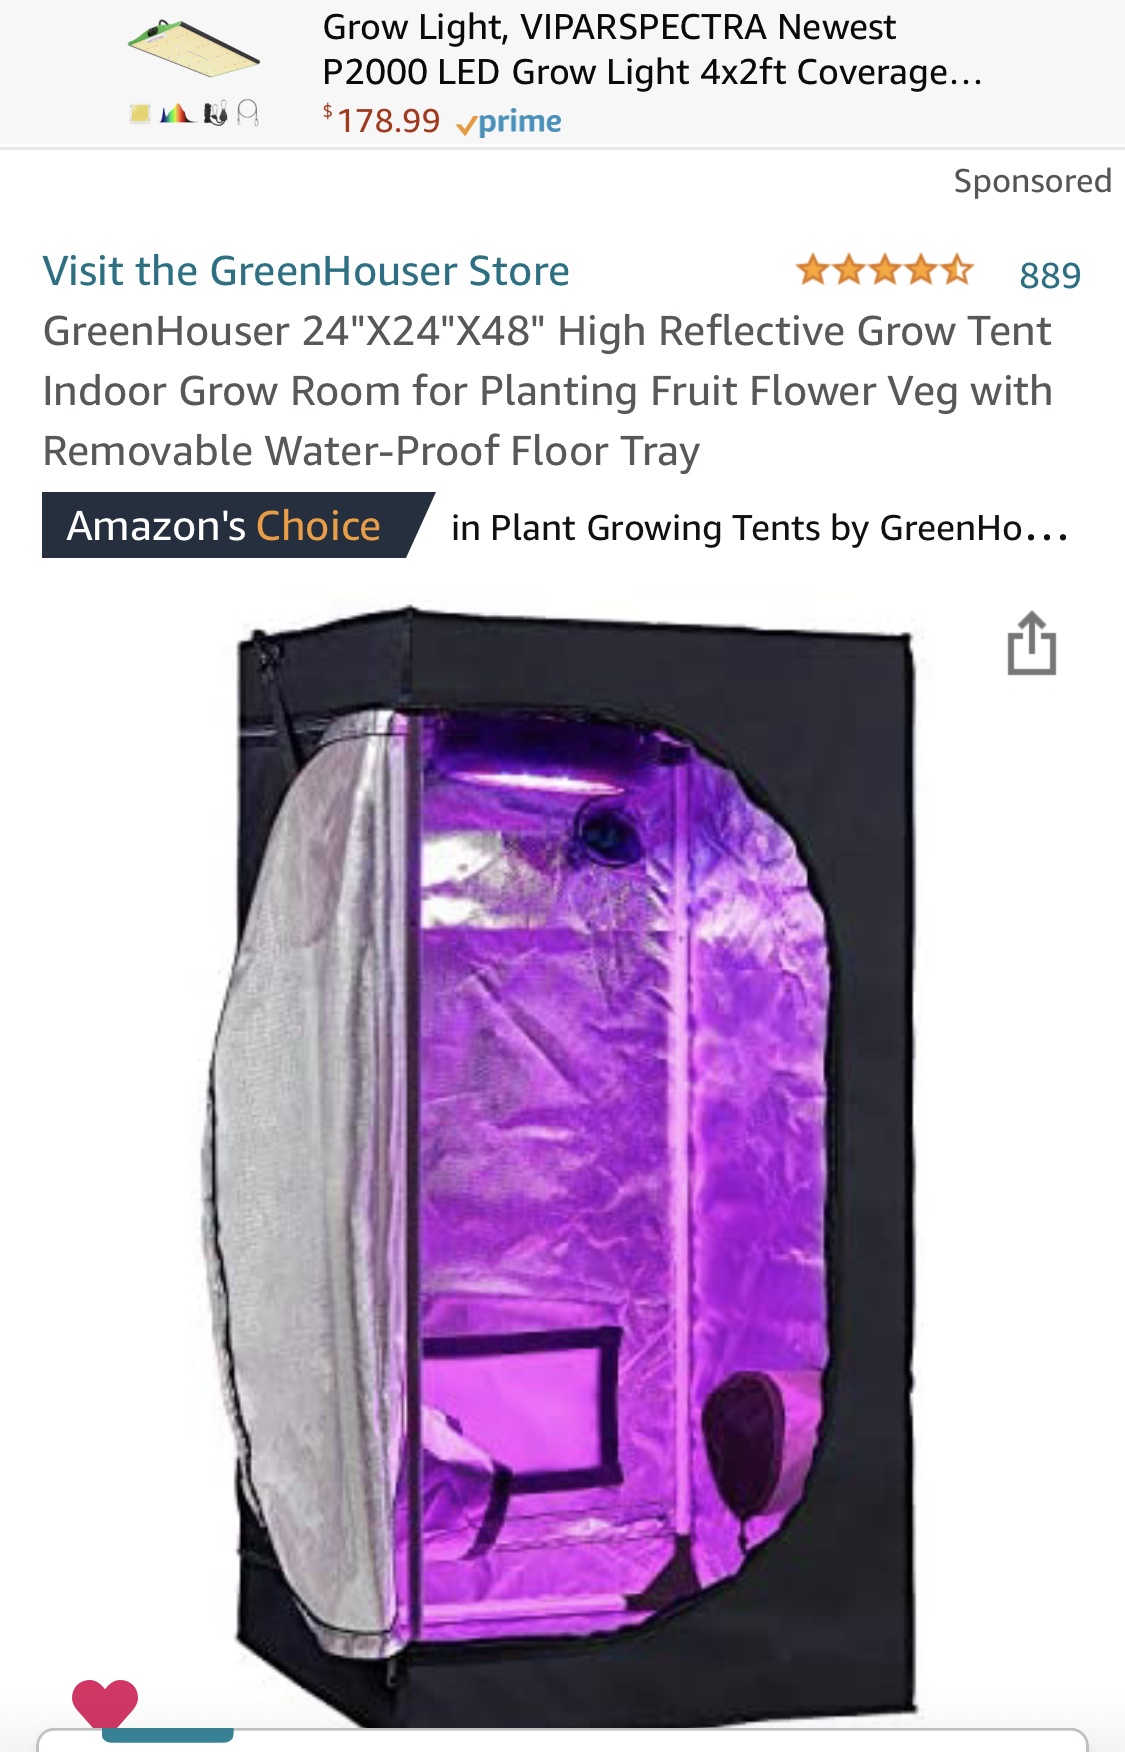 Any reviews on this indoor grow tent